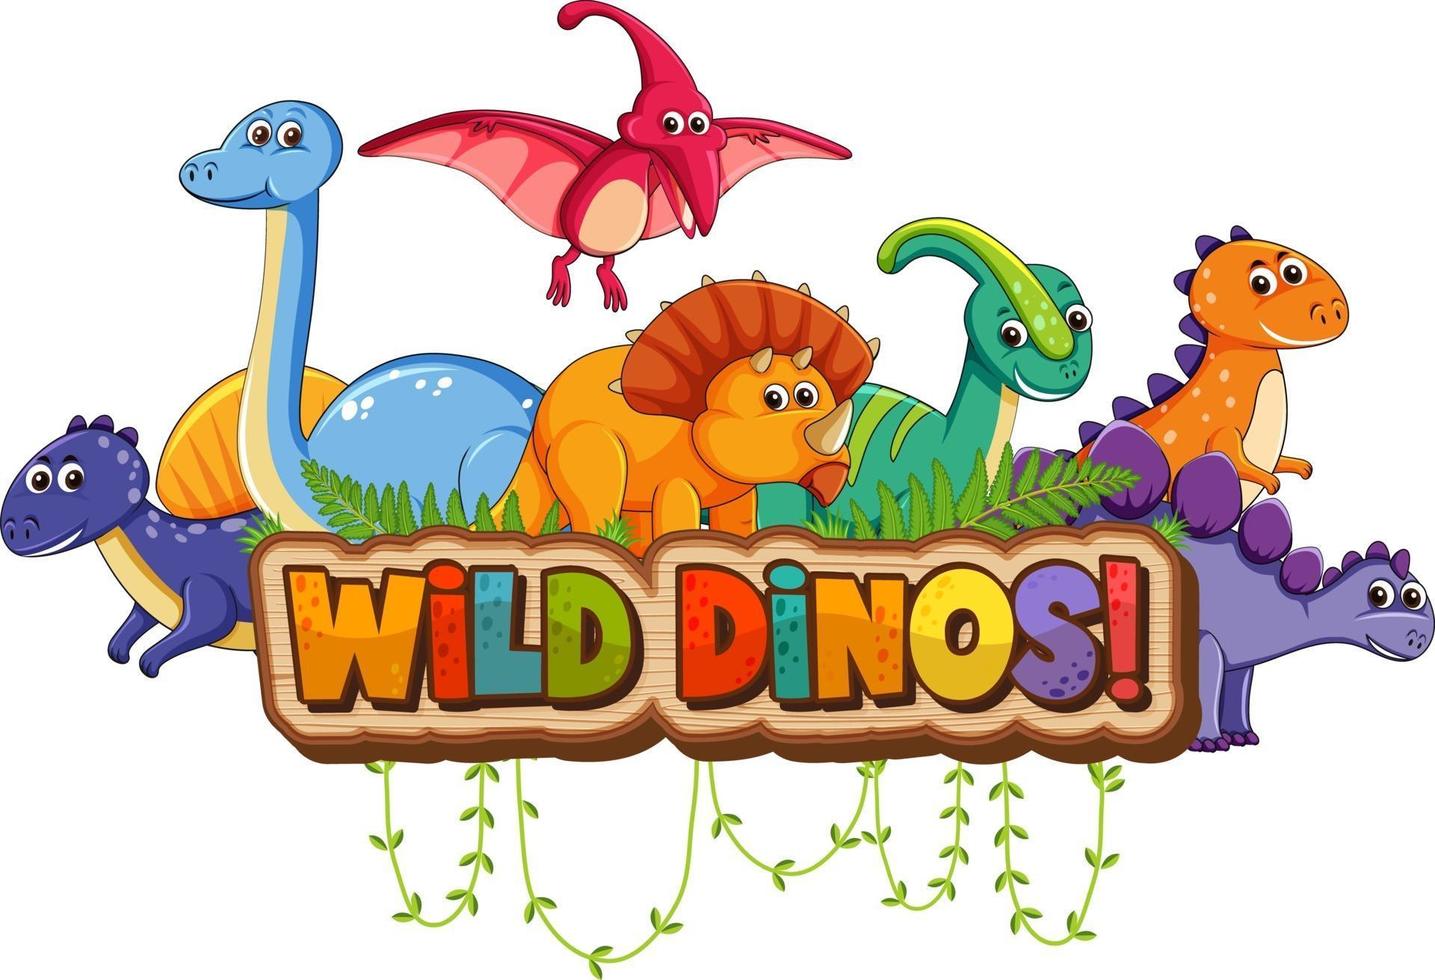 Cute dinosaurs cartoon character with wild dinos font banner vector